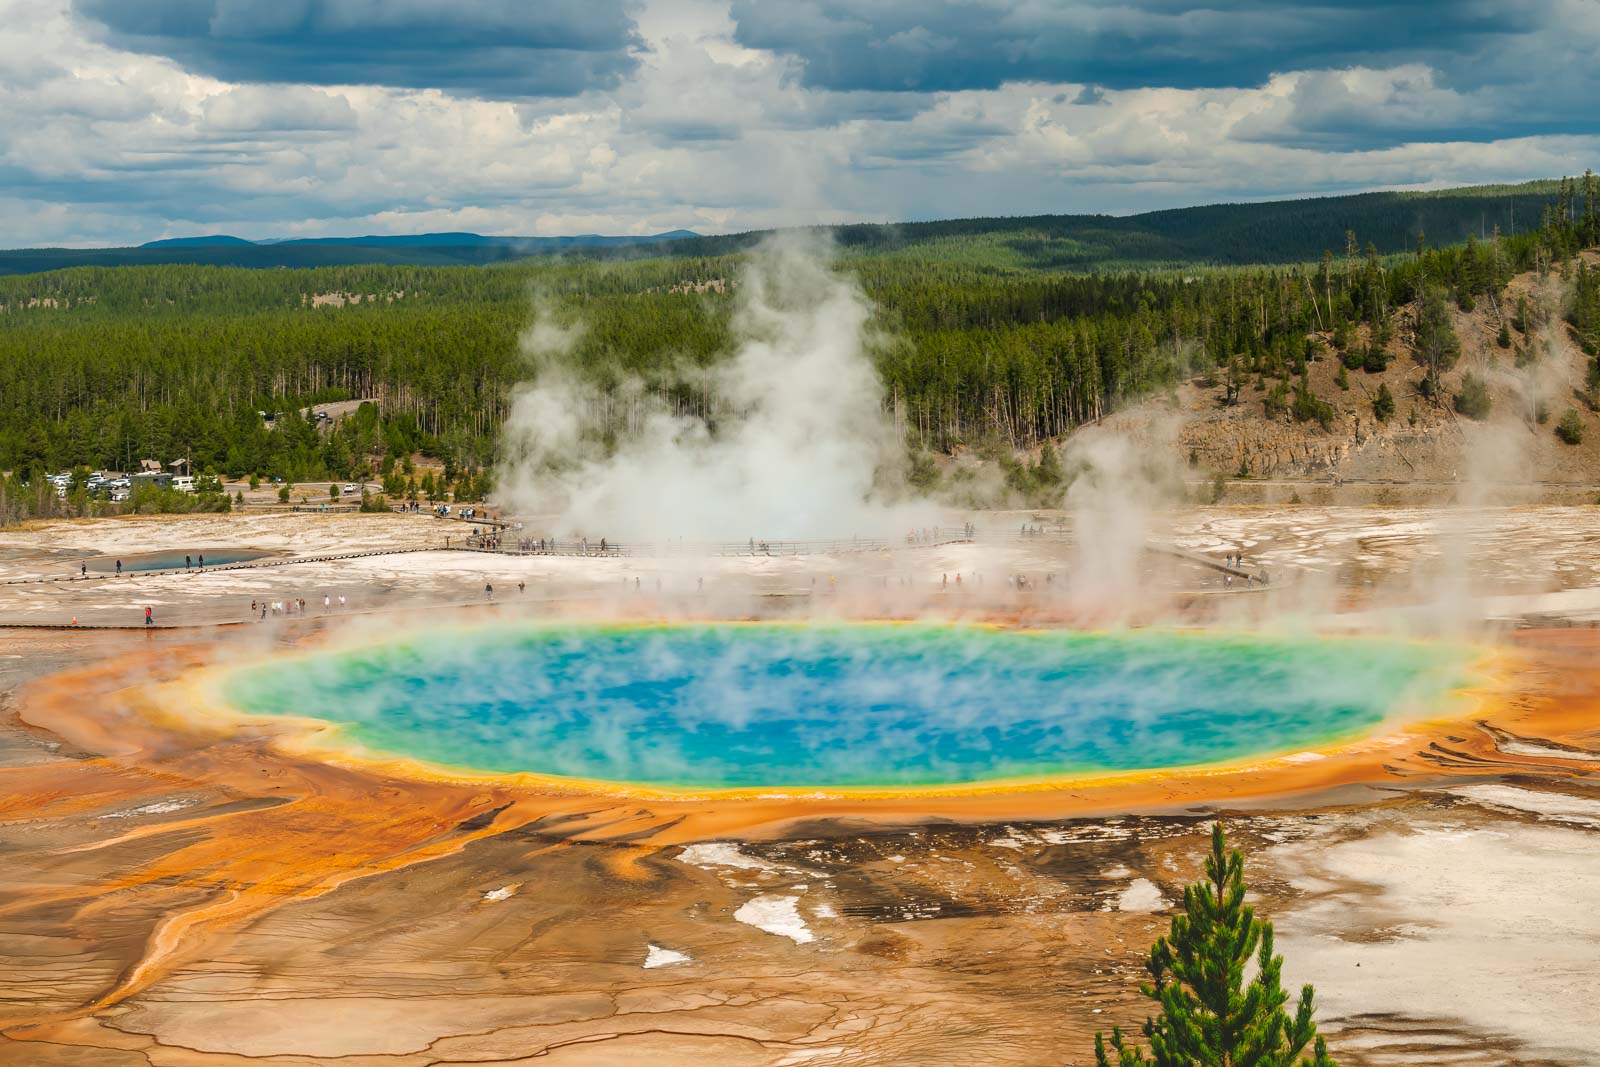 27 Things to do in Yellowstone - Plus Tips for First-time Visitors